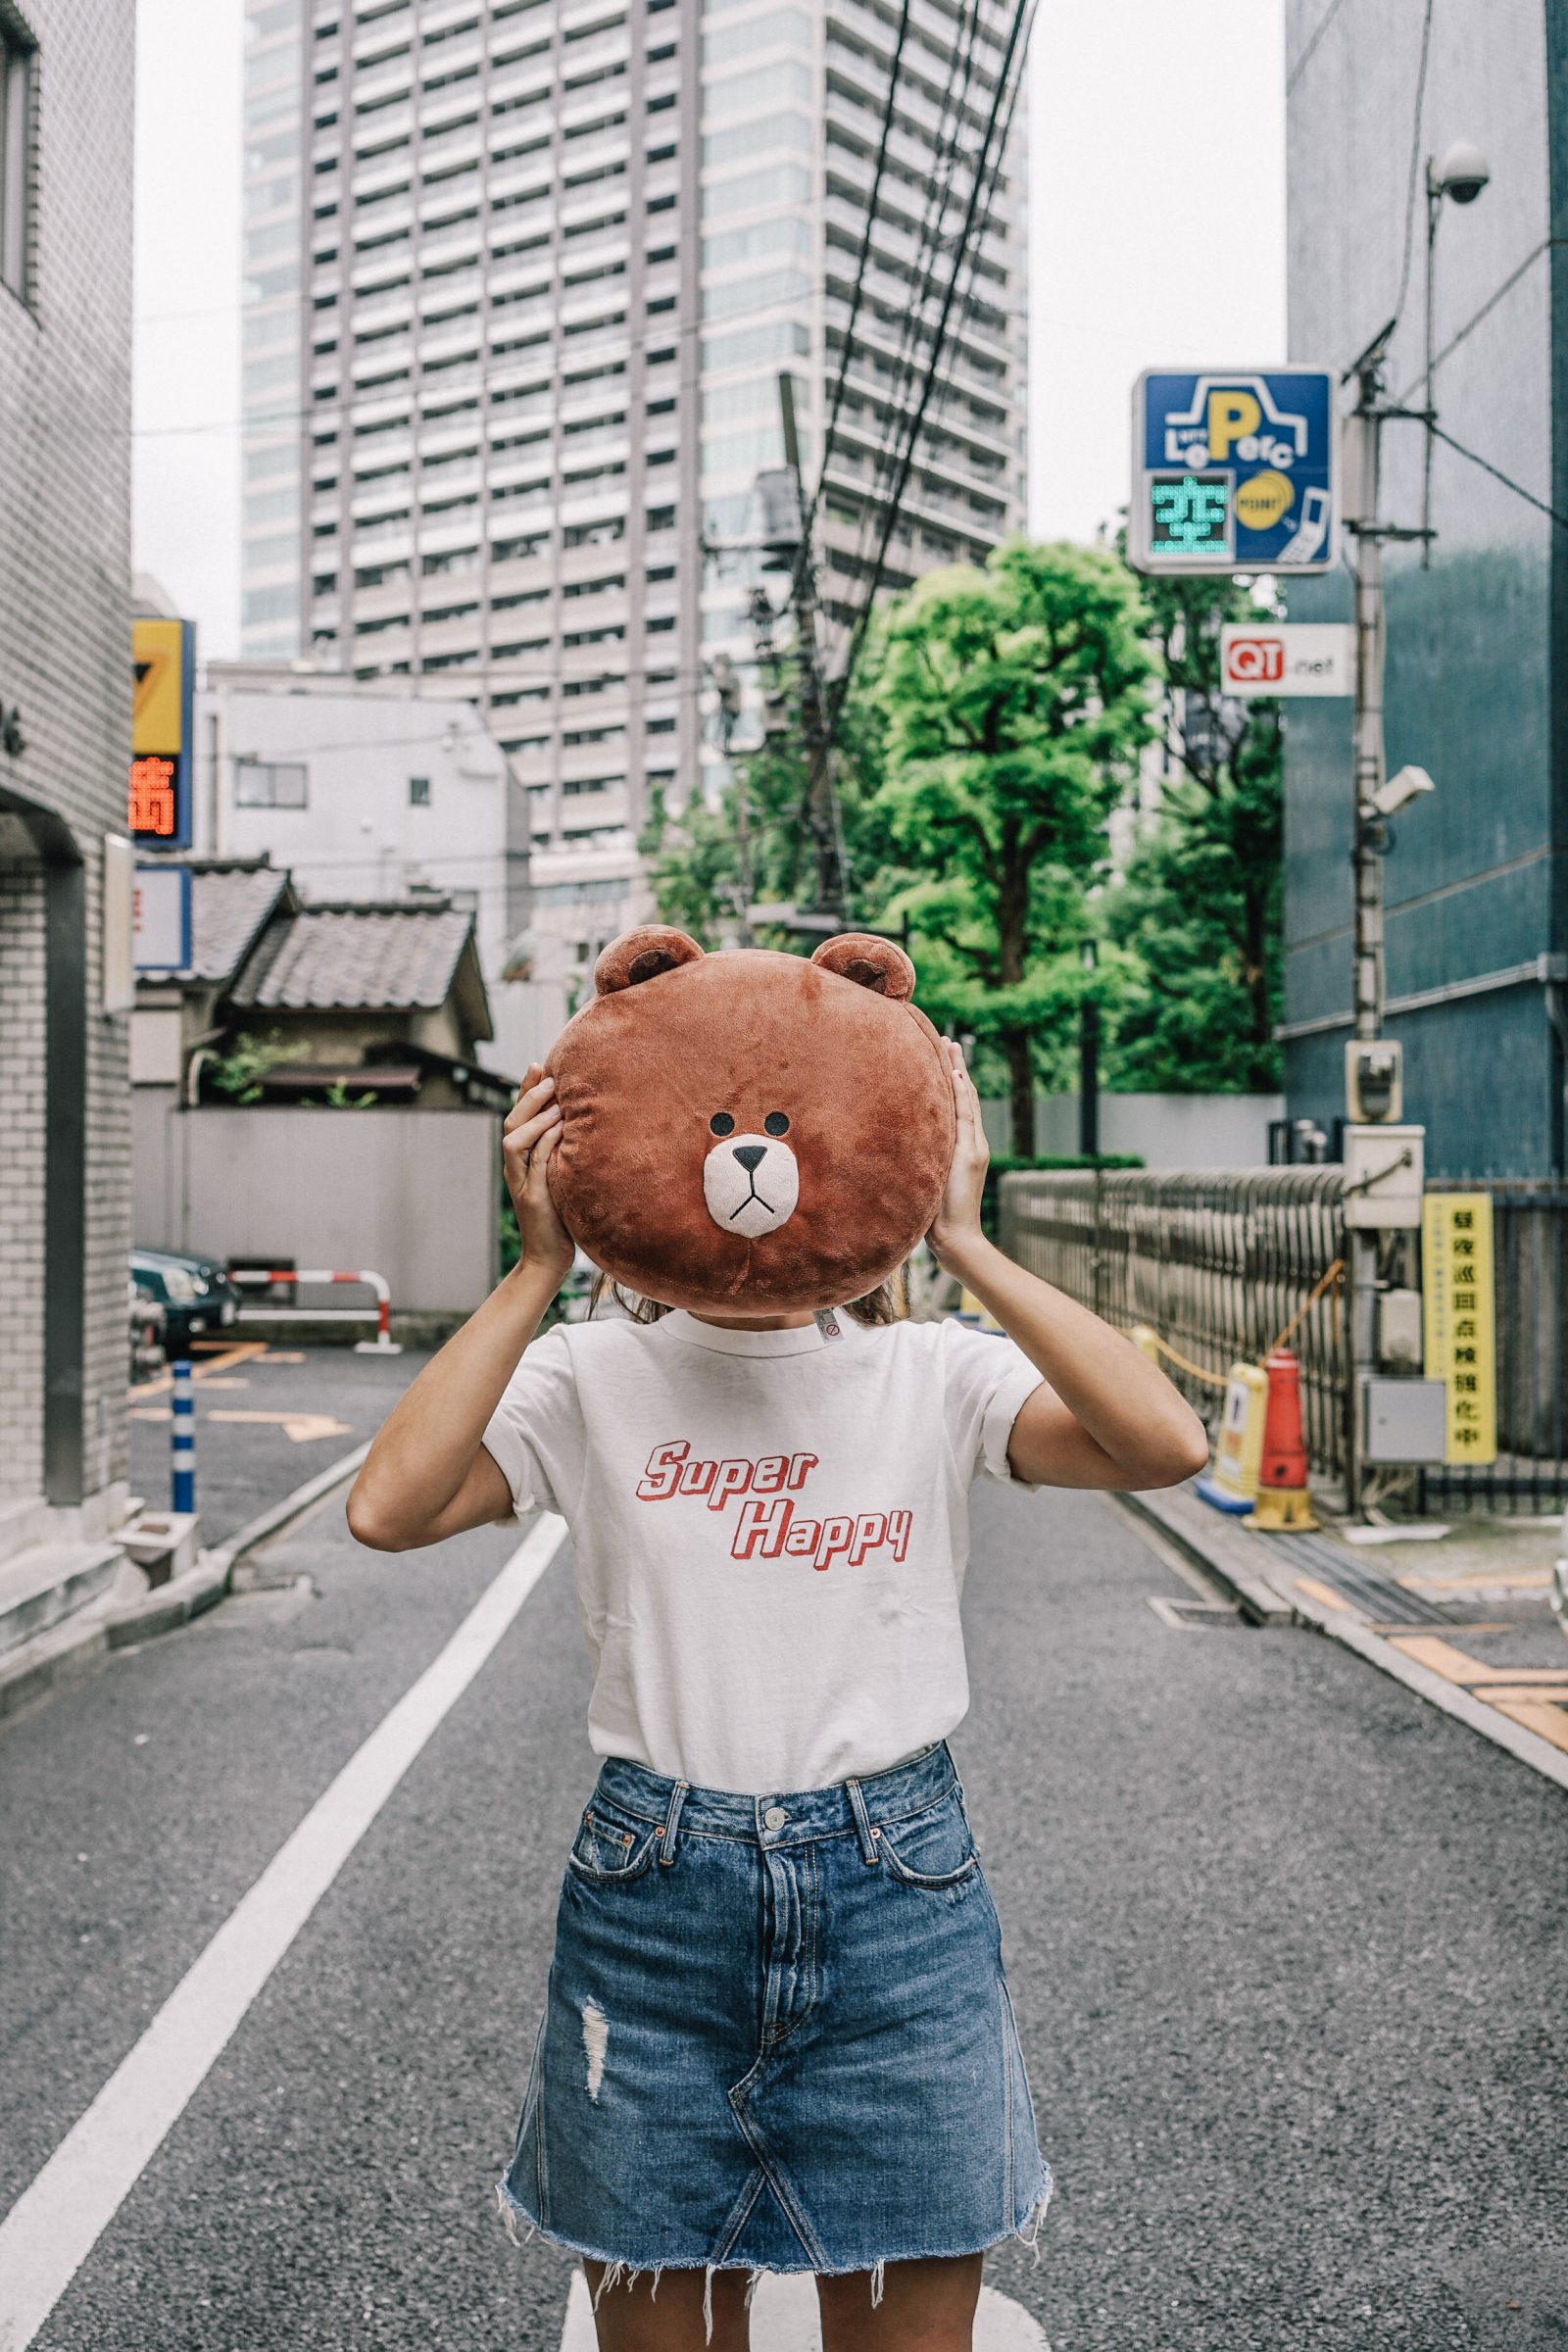 tokyo_travel_guide-outfit-collage_vintage-street_style-super_happy_top-line_friends-levis_vintage-tokyo_shopping-11